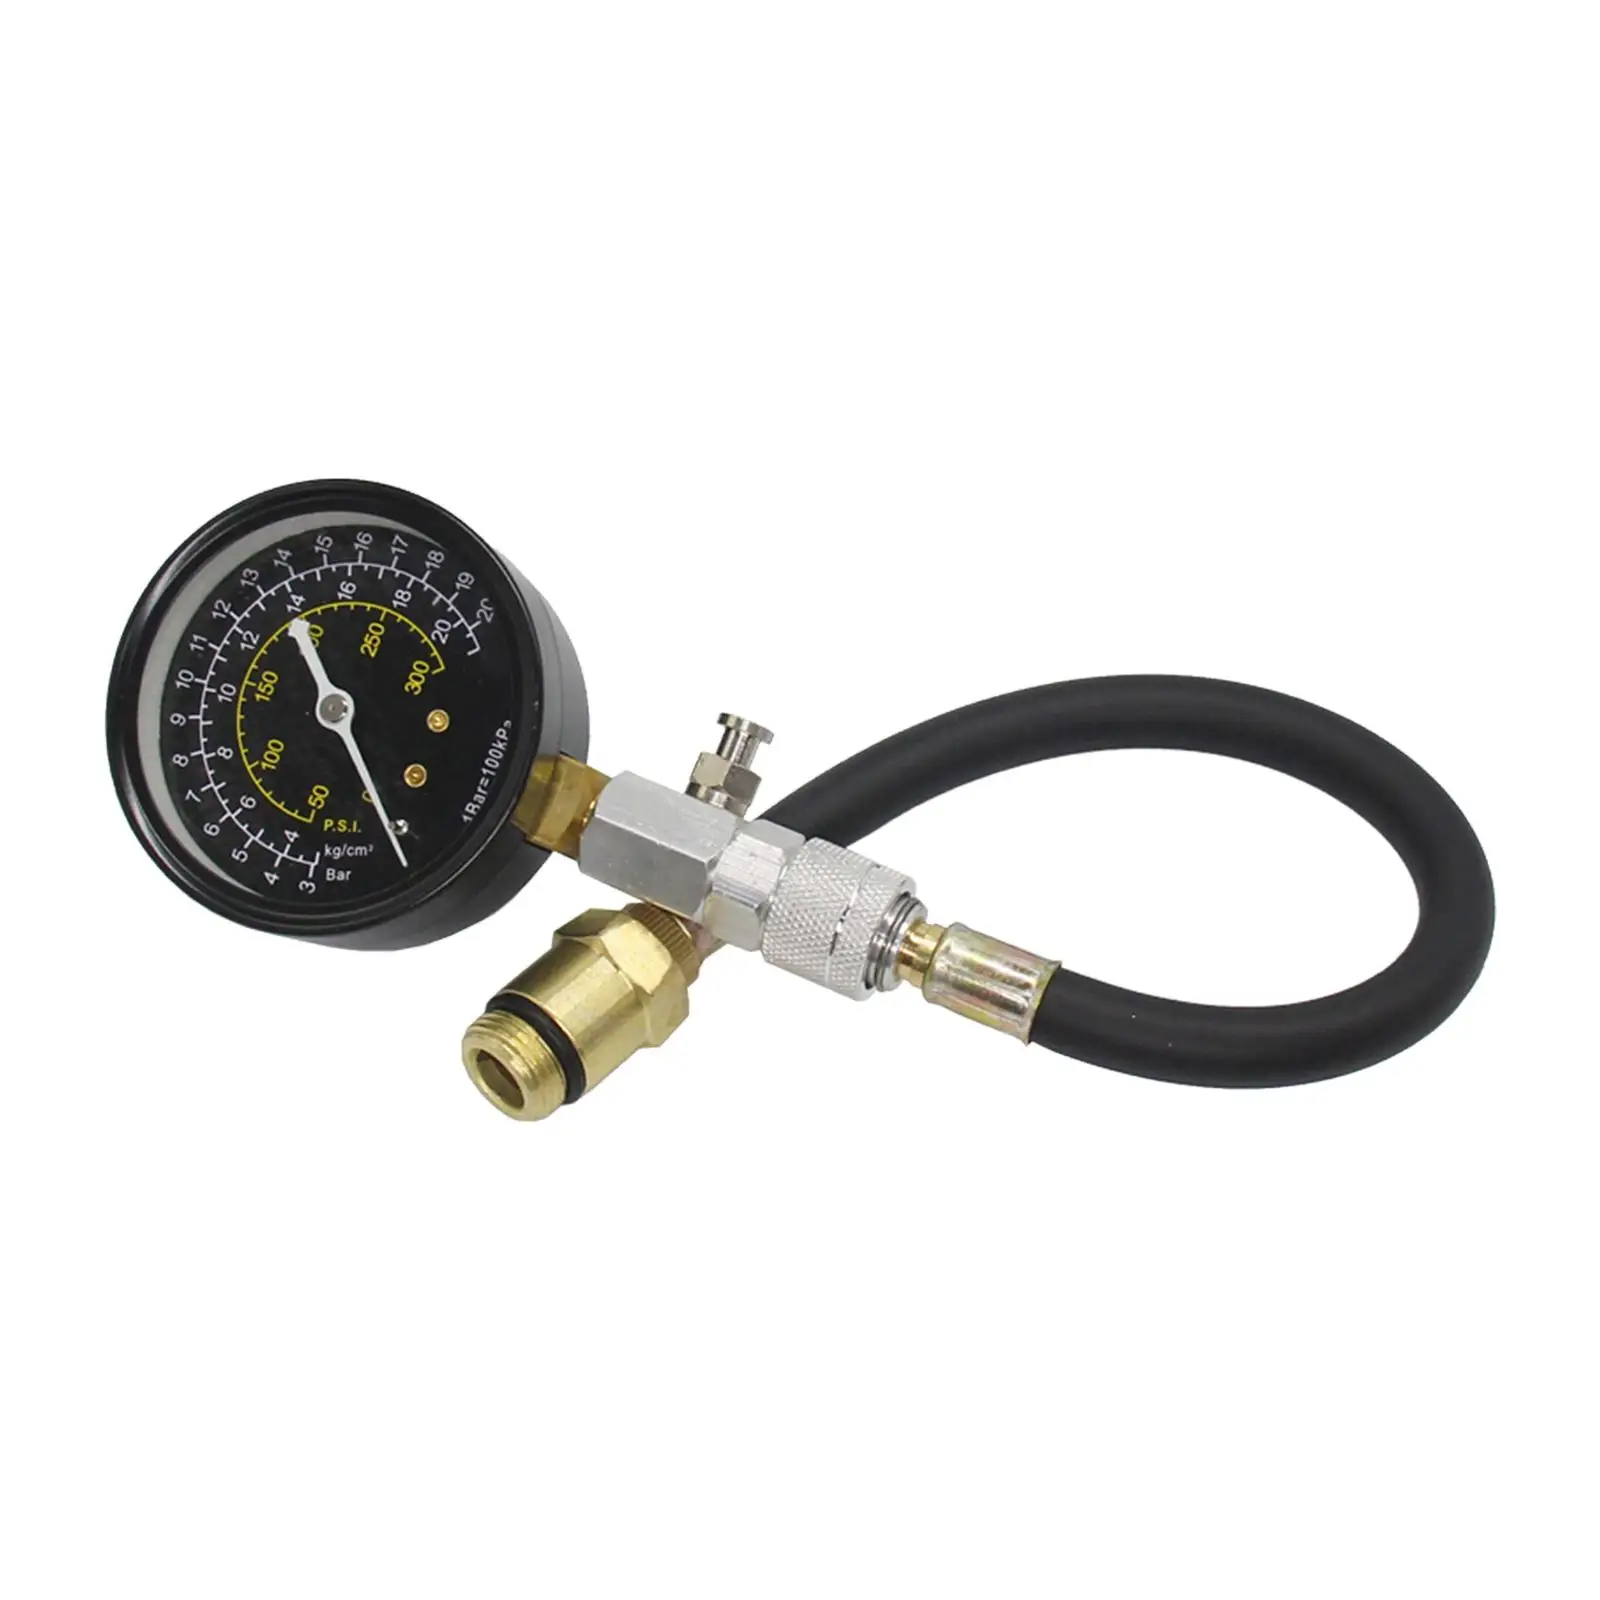 Compression 300 PSI Check Test Meter Auto Fits for Universal